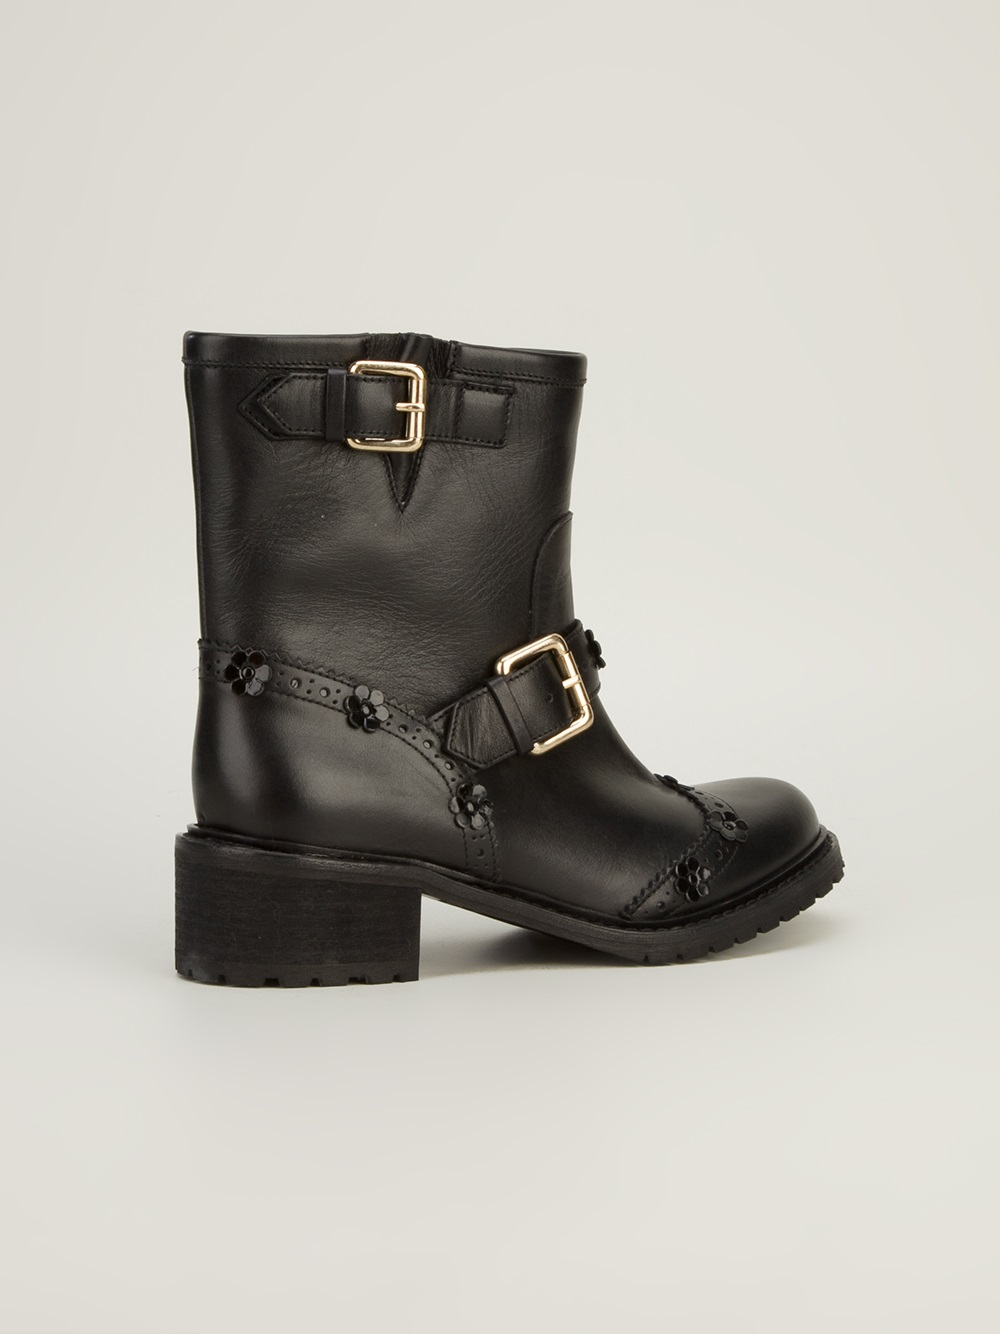 Red valentino Floral Detail Buckled Boot in Black | Lyst